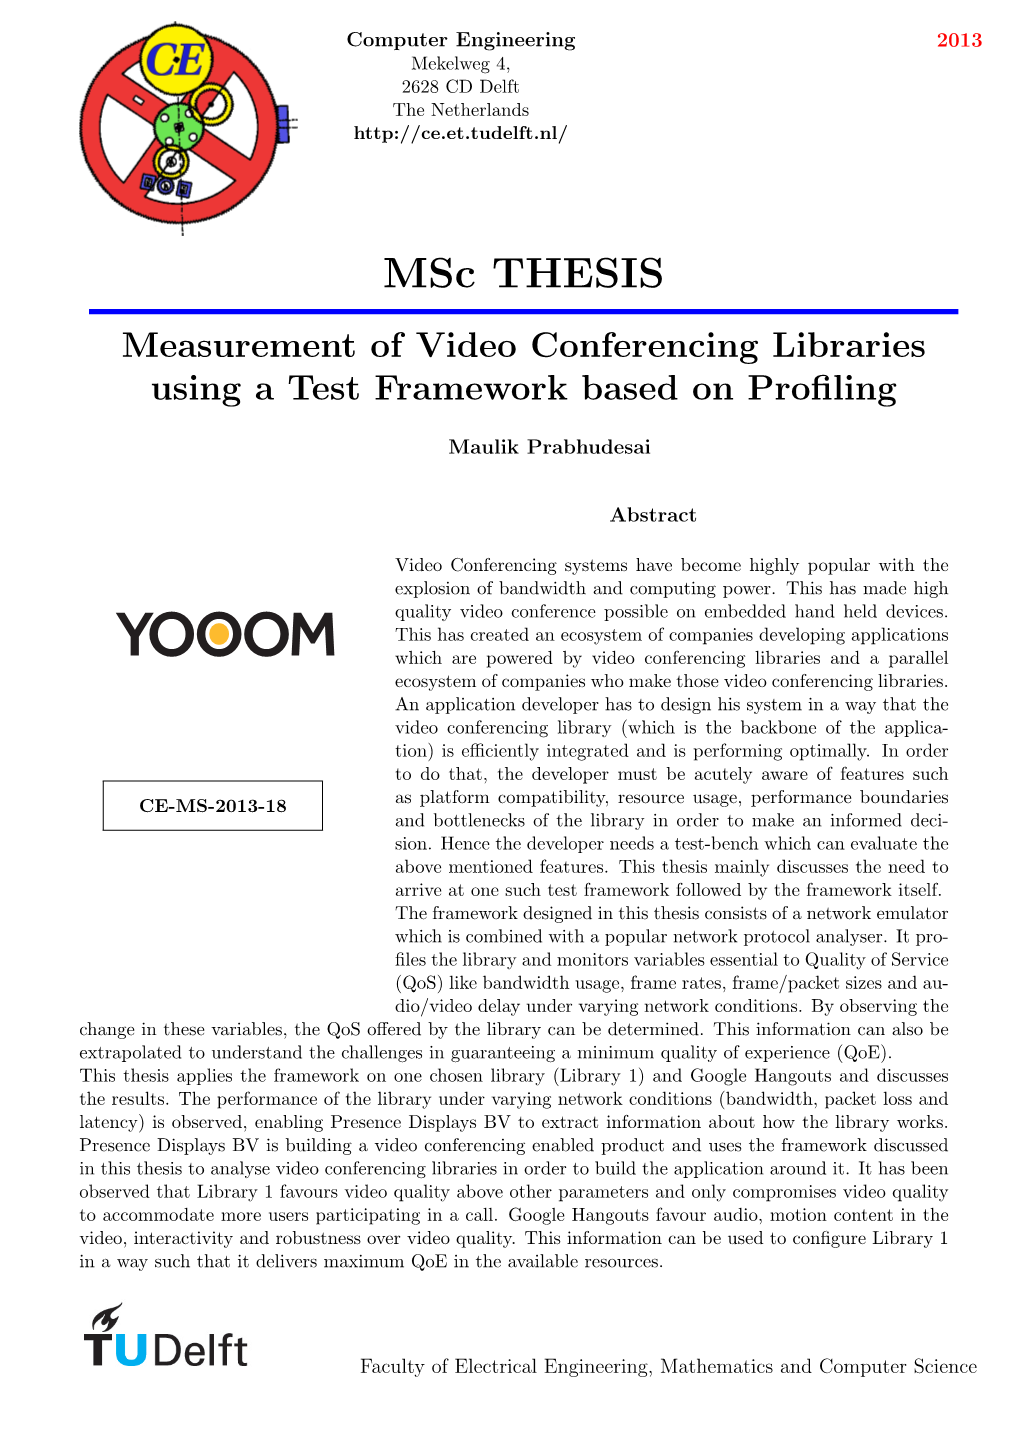 Measurement of Video Conferencing Libraries Using a Test Framework Based on Proﬁling